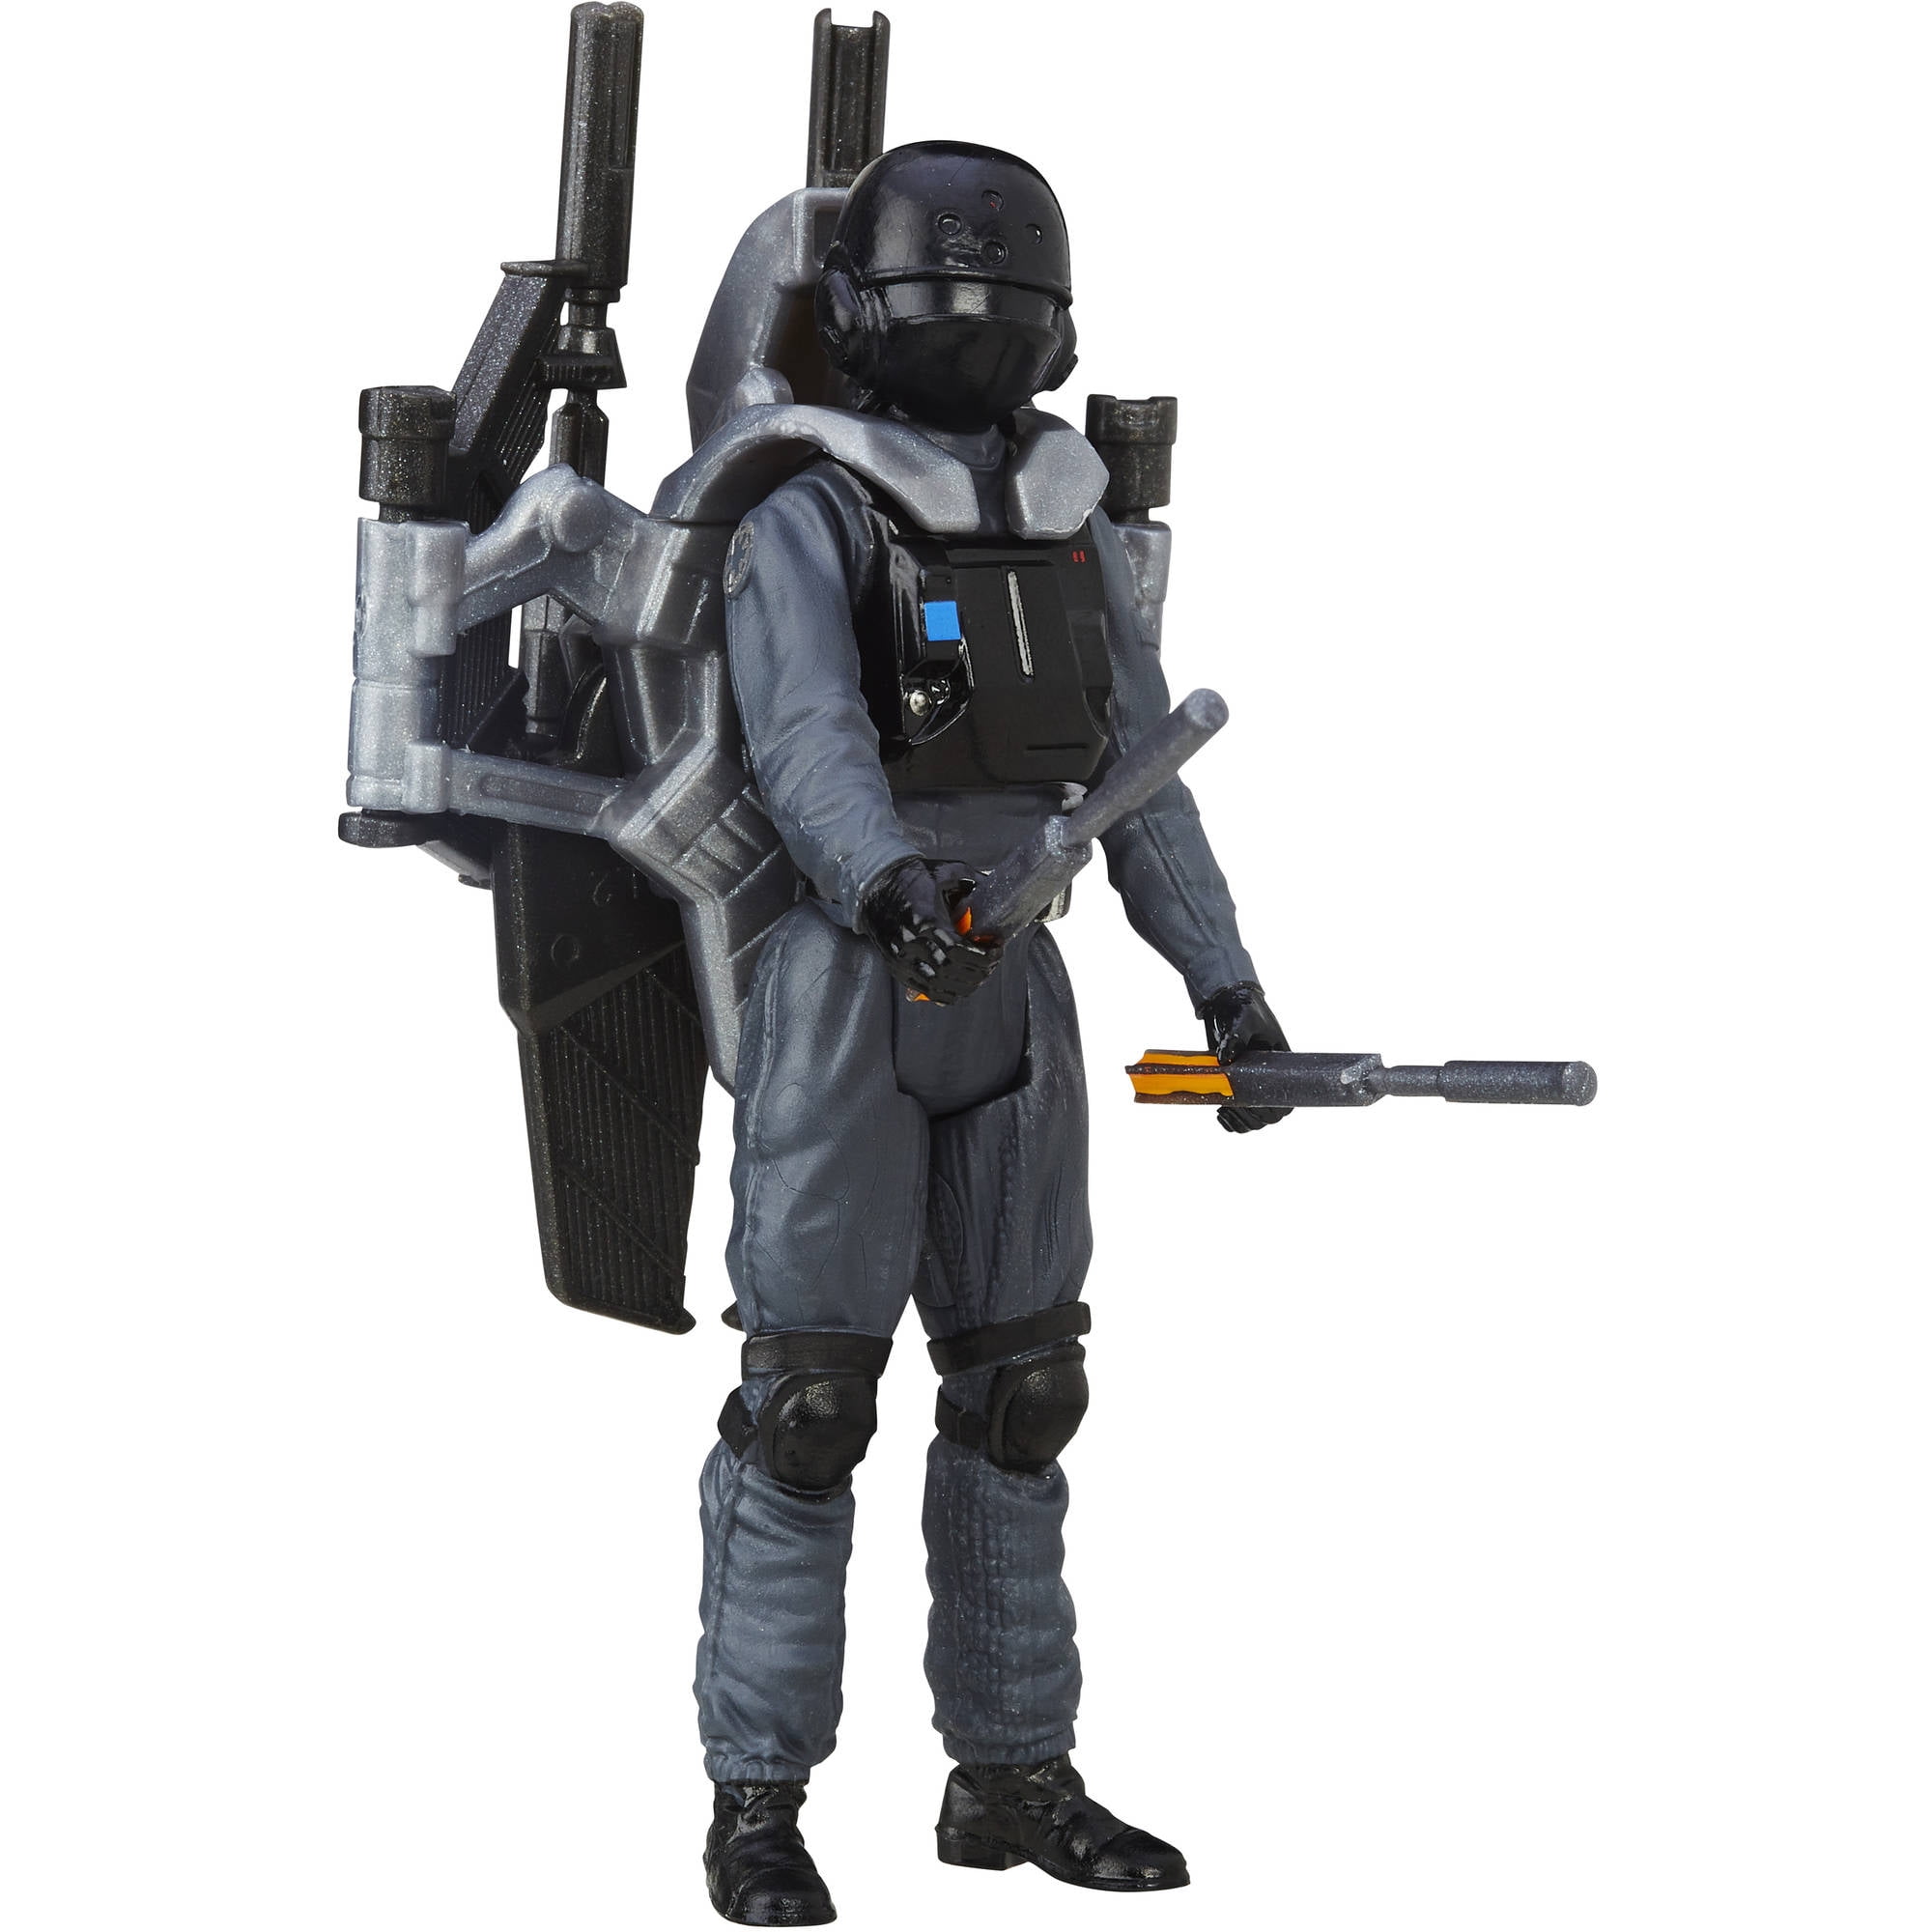 Star Wars Rogue One Imperial Ground Crew Action Figure Hasbro 3 3/4 Inch 2016 for sale online 